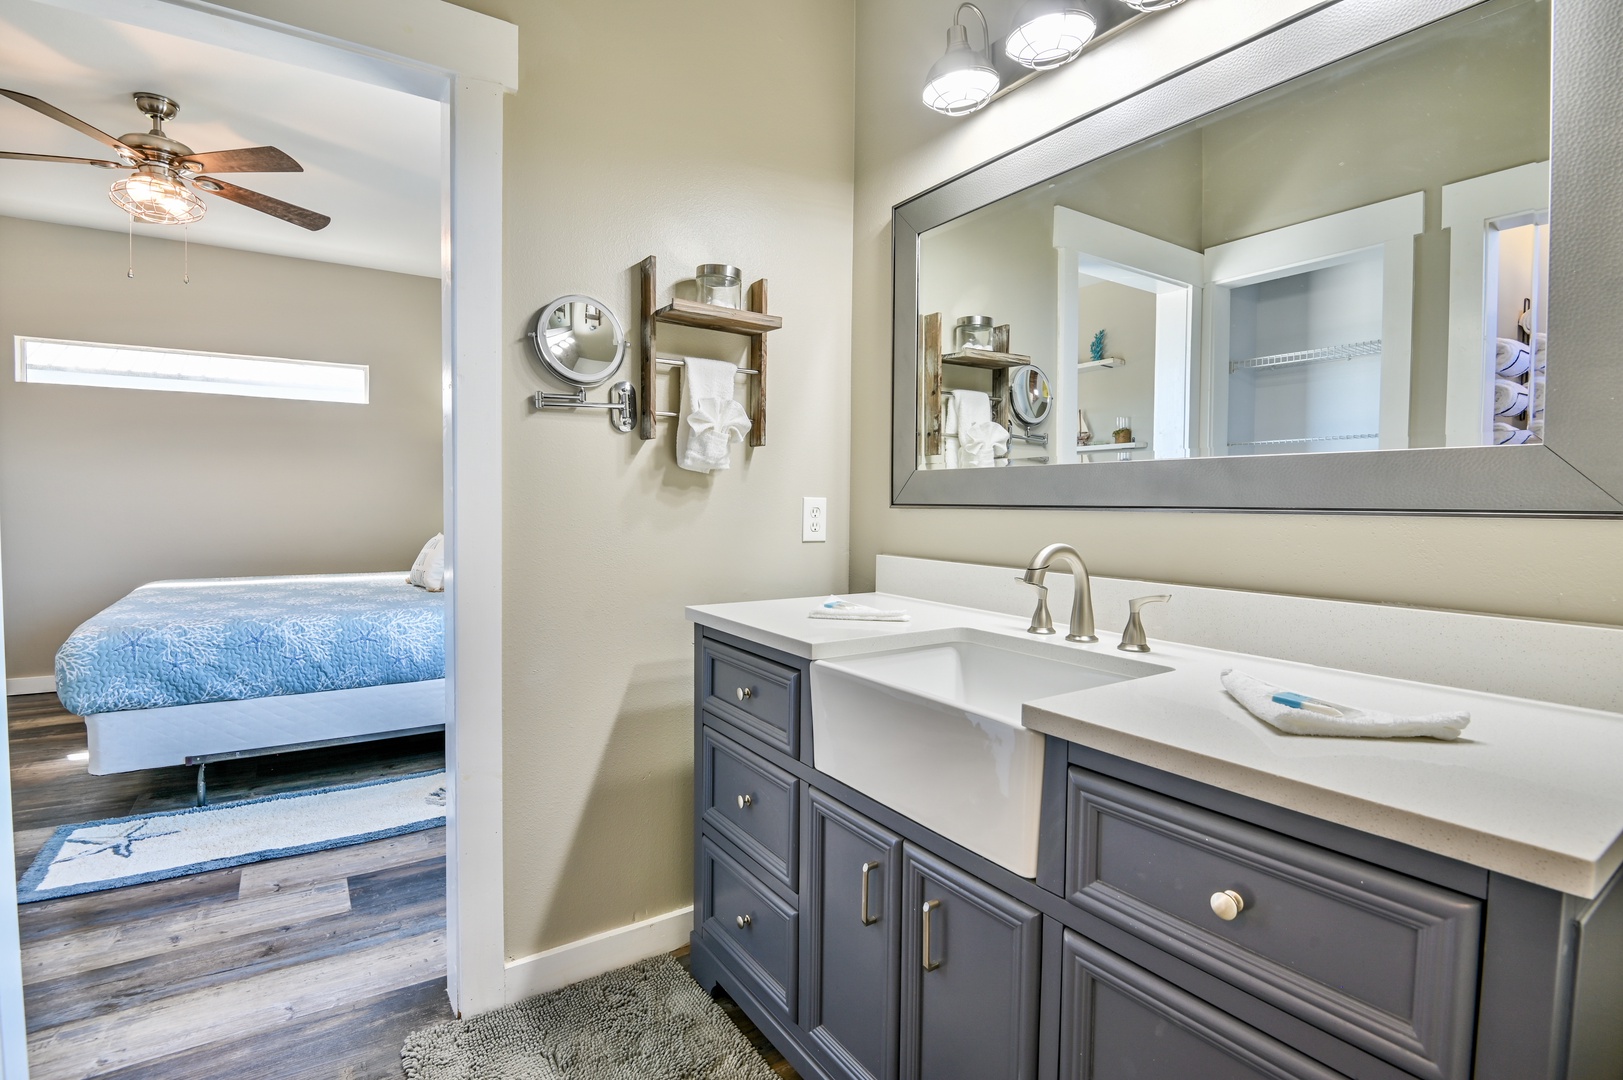 A stylish vanity and luxurious shower awaits in the king ensuite